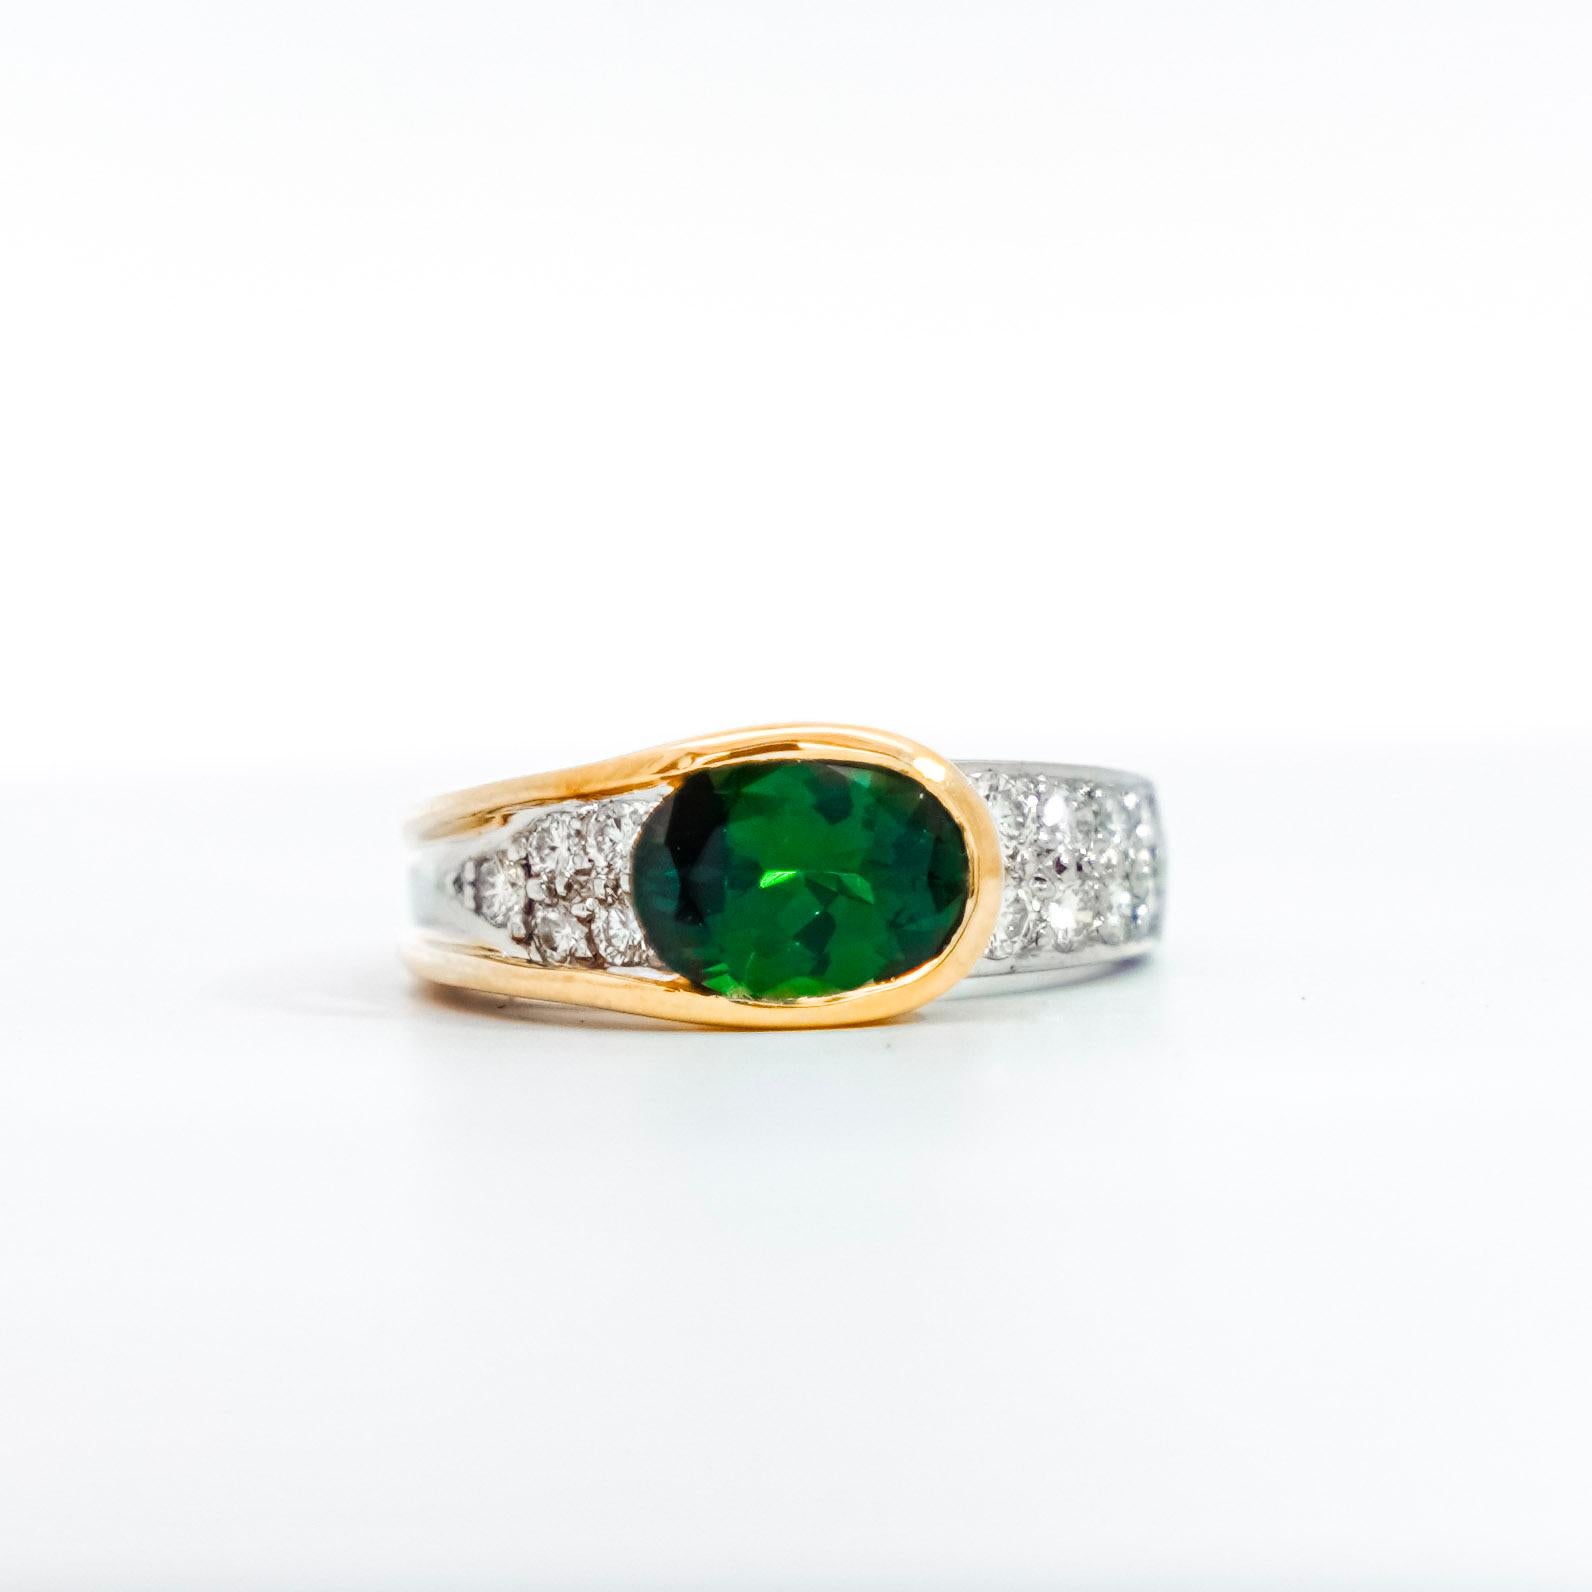 GIA Certified Green 2.50 Carat Tzavorite and Diamond Overpass 18K Gold and Platinum Ring. Signed by Richard Krementz. The center stone, Tzavorite, belongs to the Grossular Garney semi-precious species. This ring features a gorgeous overpass design